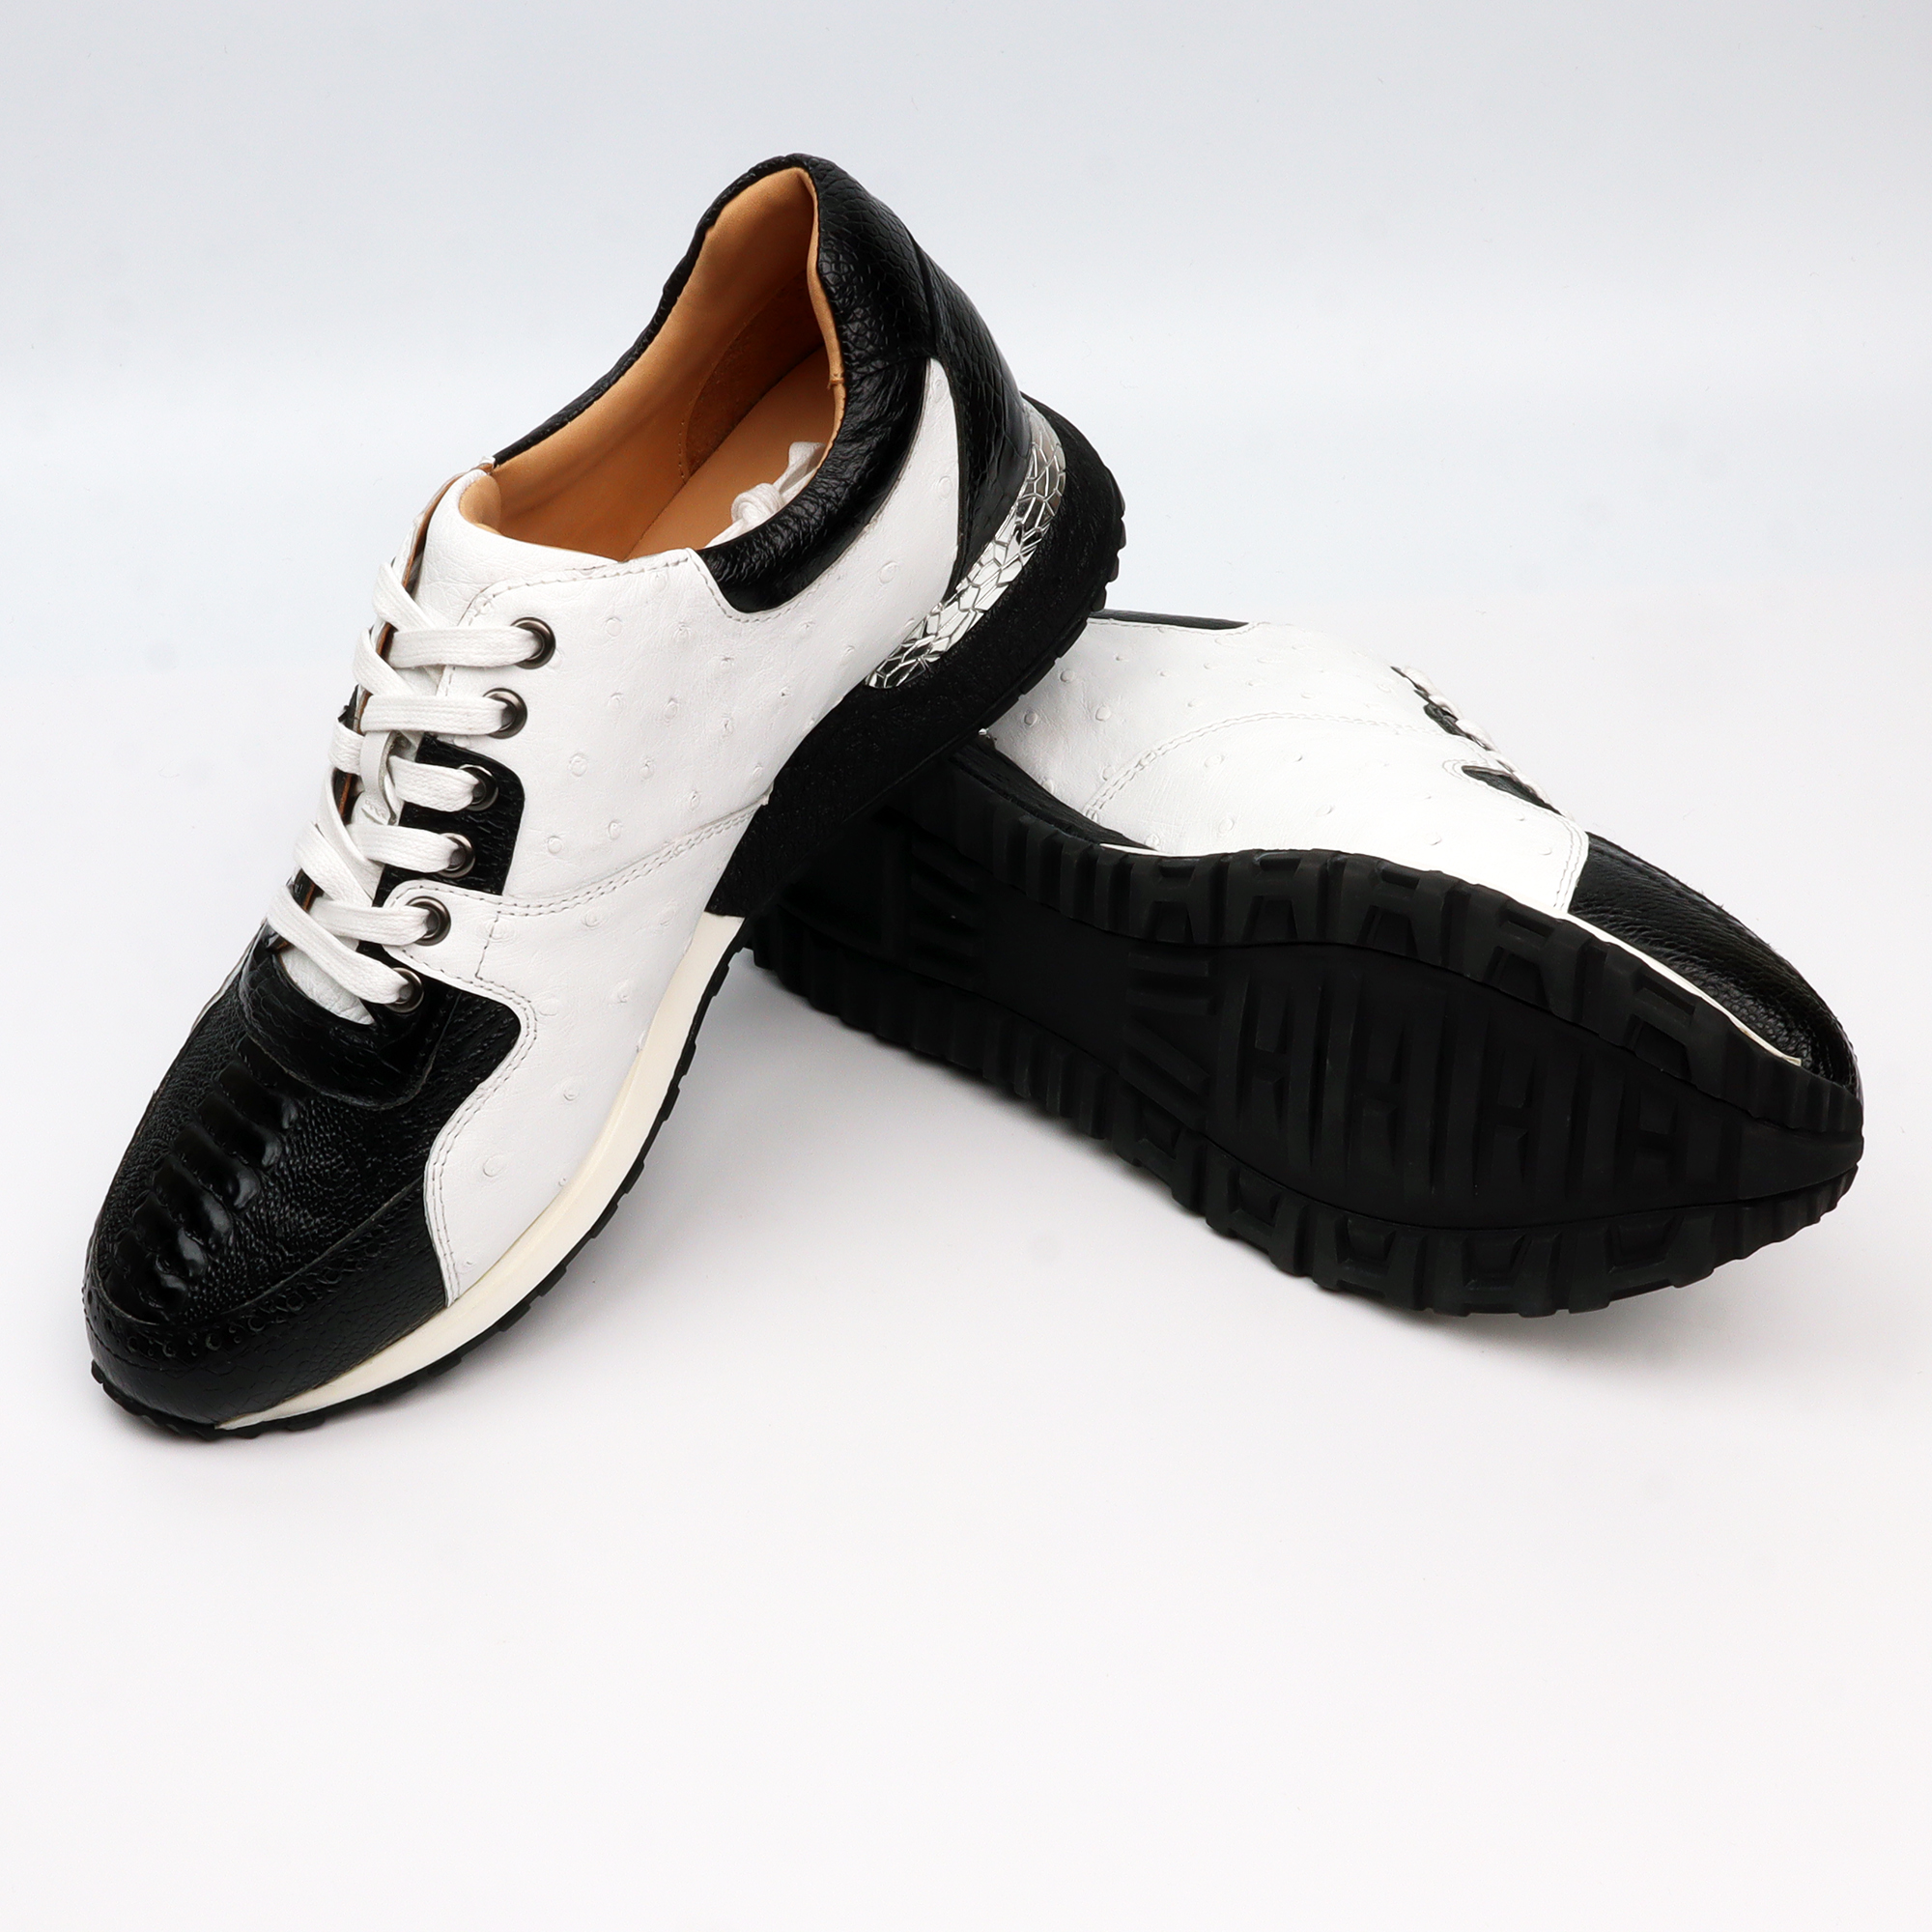 Genuine Ostrich Leather Sneaker Fashion Design Shoes for Men